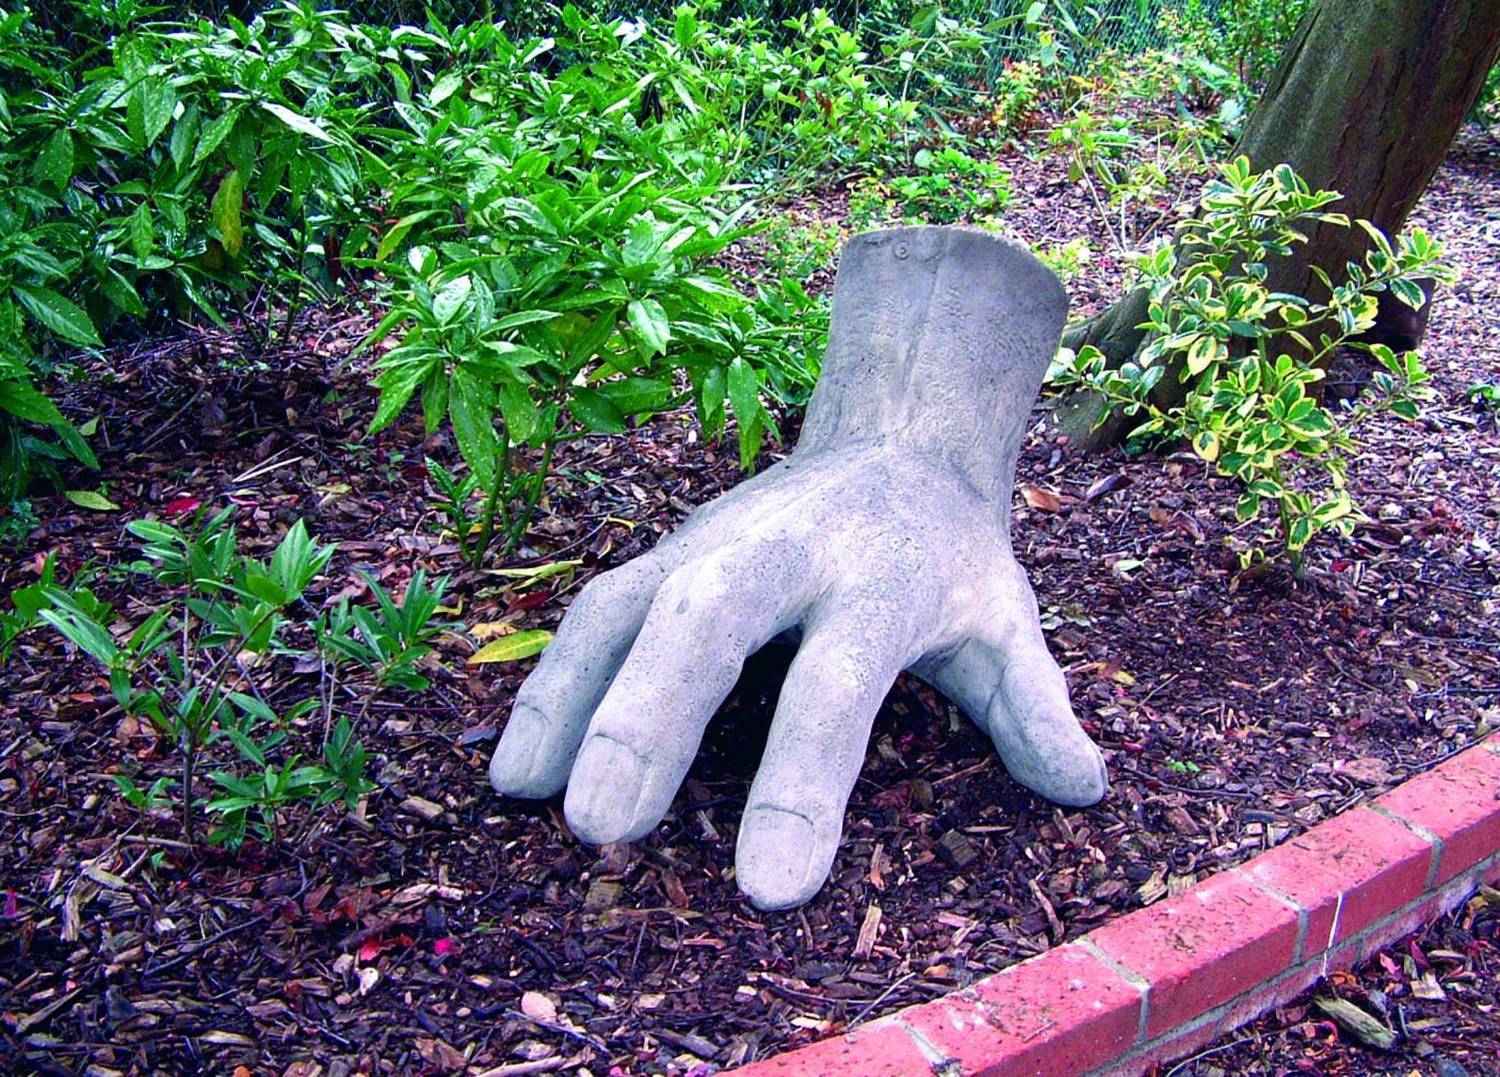 Giant Right Hand Garden Statue Lying down